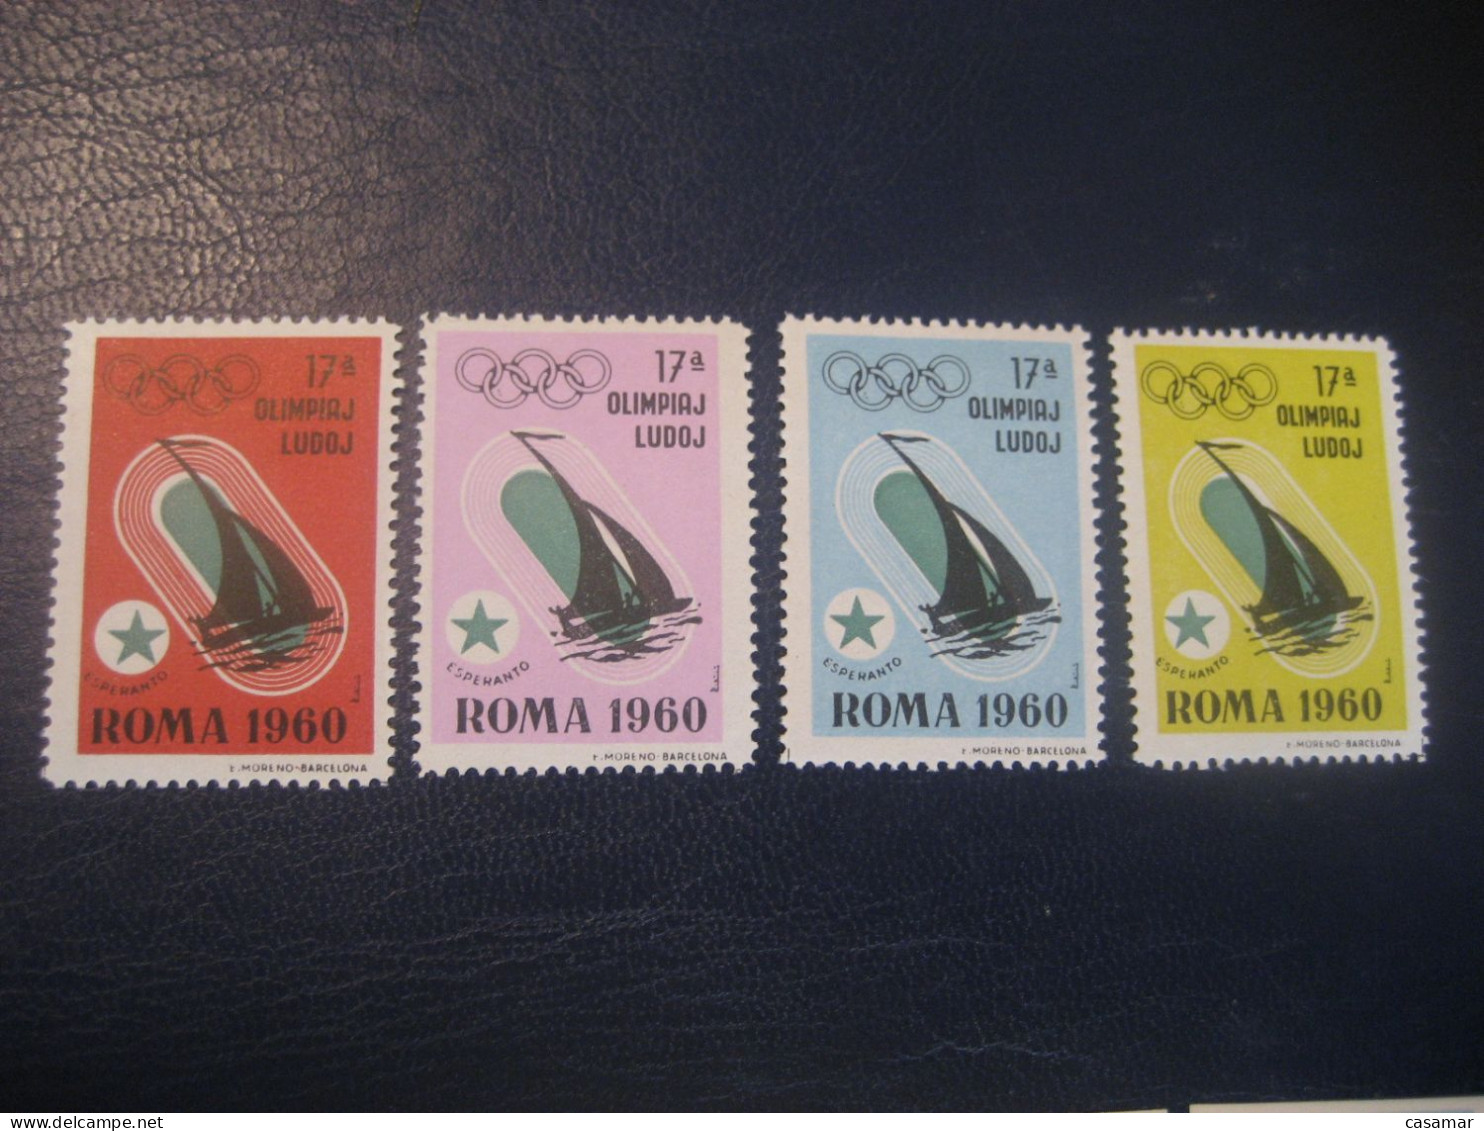 ROMA 1960 Sailing Voile Olympic Games Olympics Esperanto 4 Poster Stamp Vignette ITALY Spain Label - Zeilen